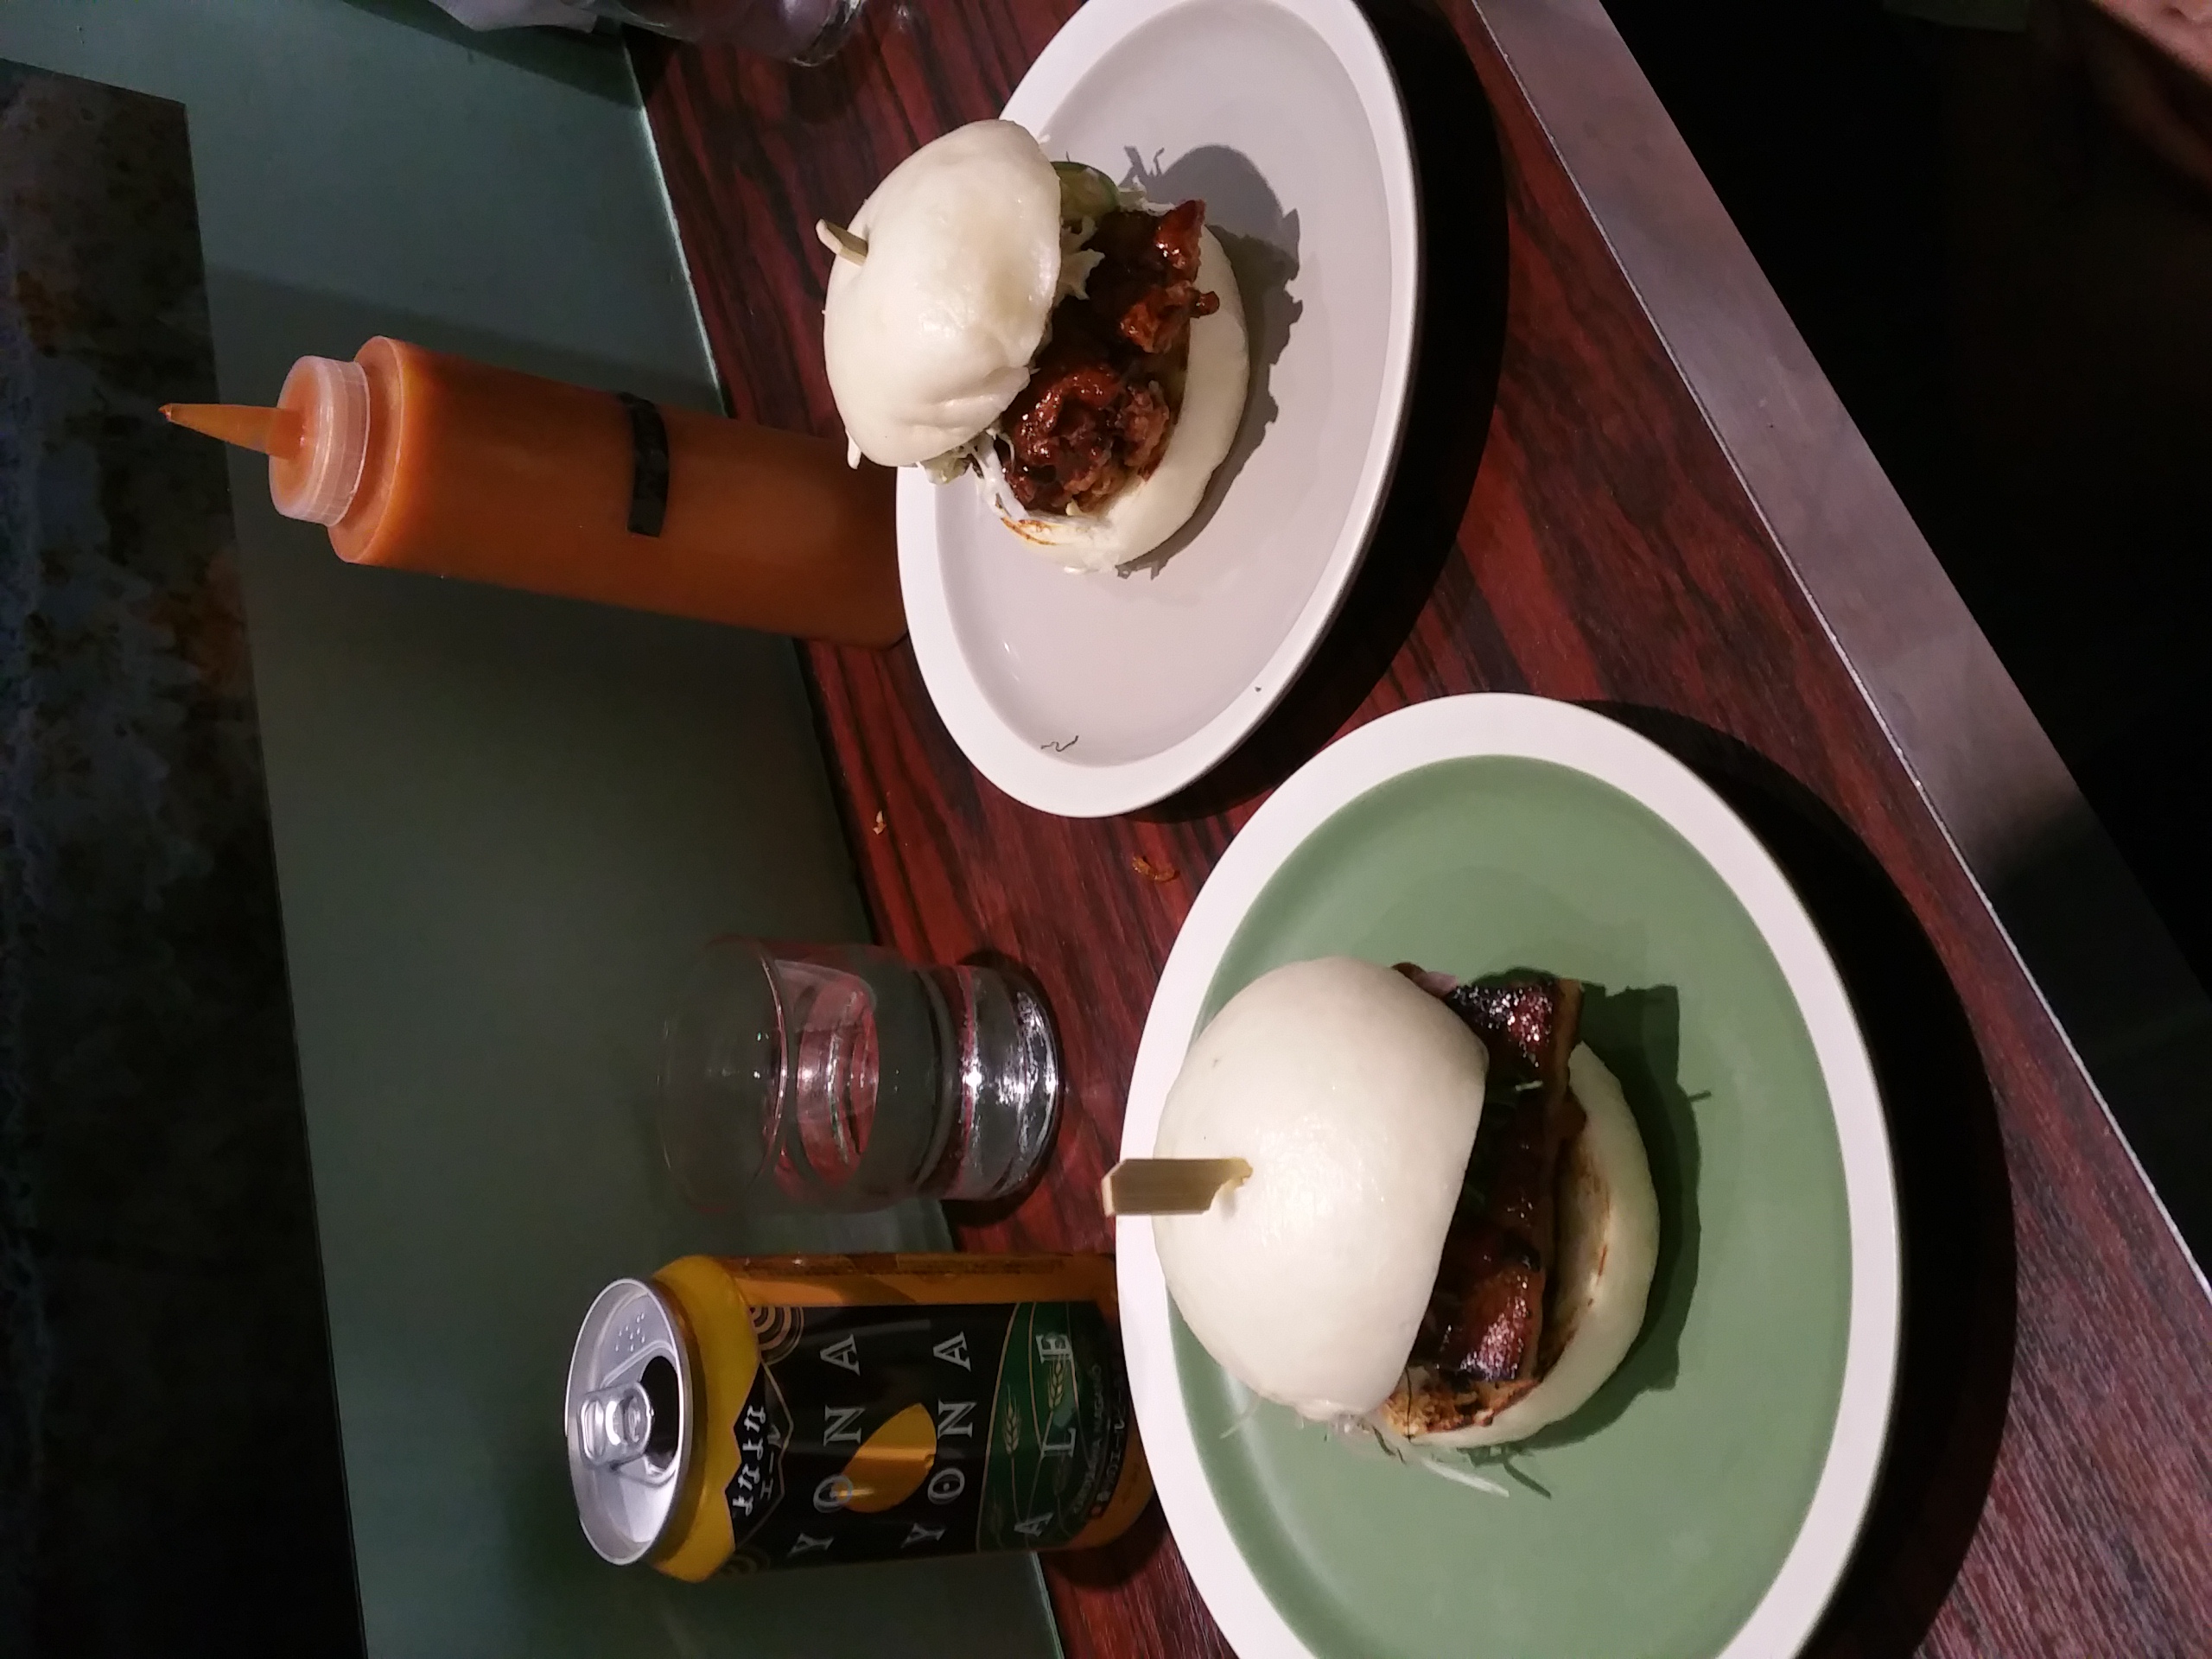  Pork belly and Szechuan fried chicken baos. Not pictured: Brussels sprouts with chili, lime, peanut, and fried shallots; "LB" fries; and green tea and salted caramel ice cream baos. Also not pictured: hilarious waiter. "White people really liked the